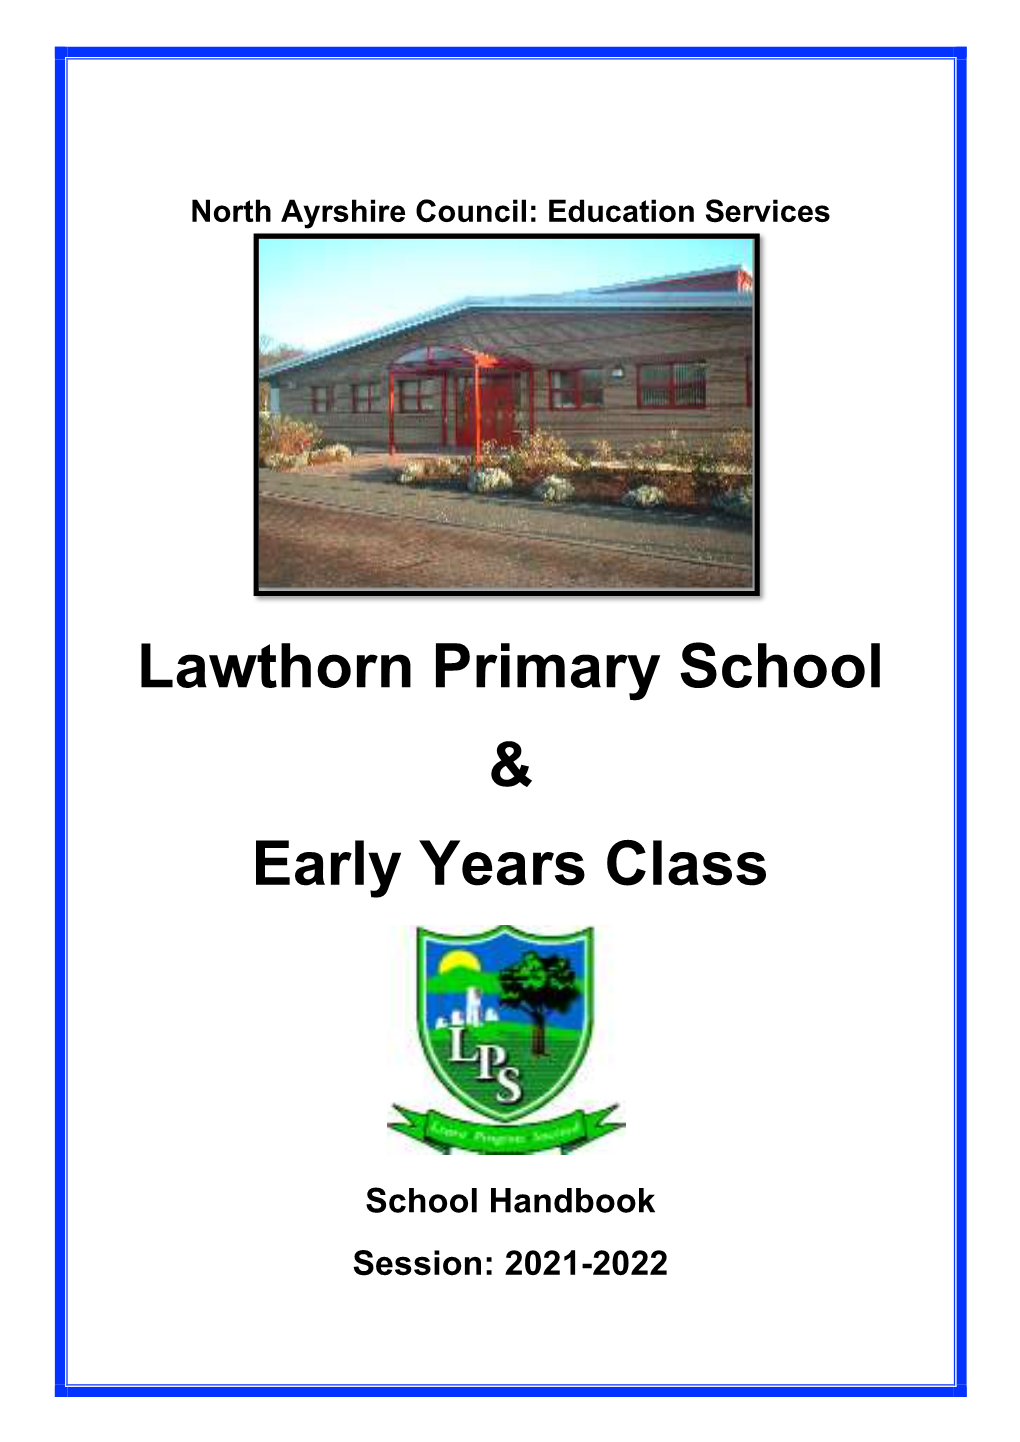 Lawthorn Primary School & Early Years Class